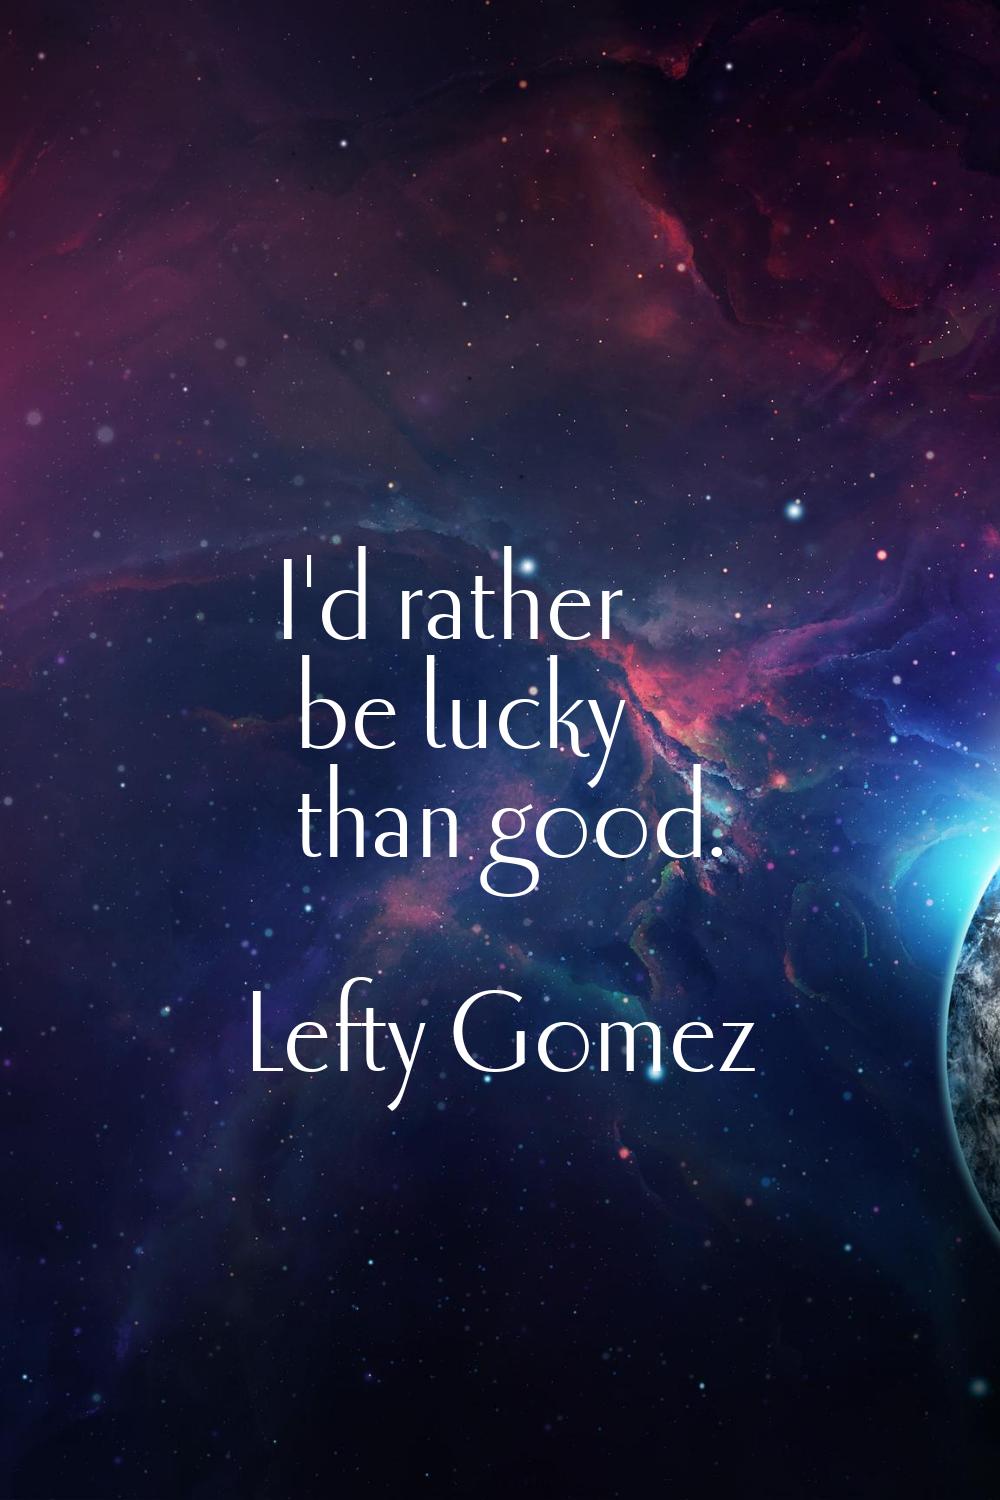 I'd rather be lucky than good.